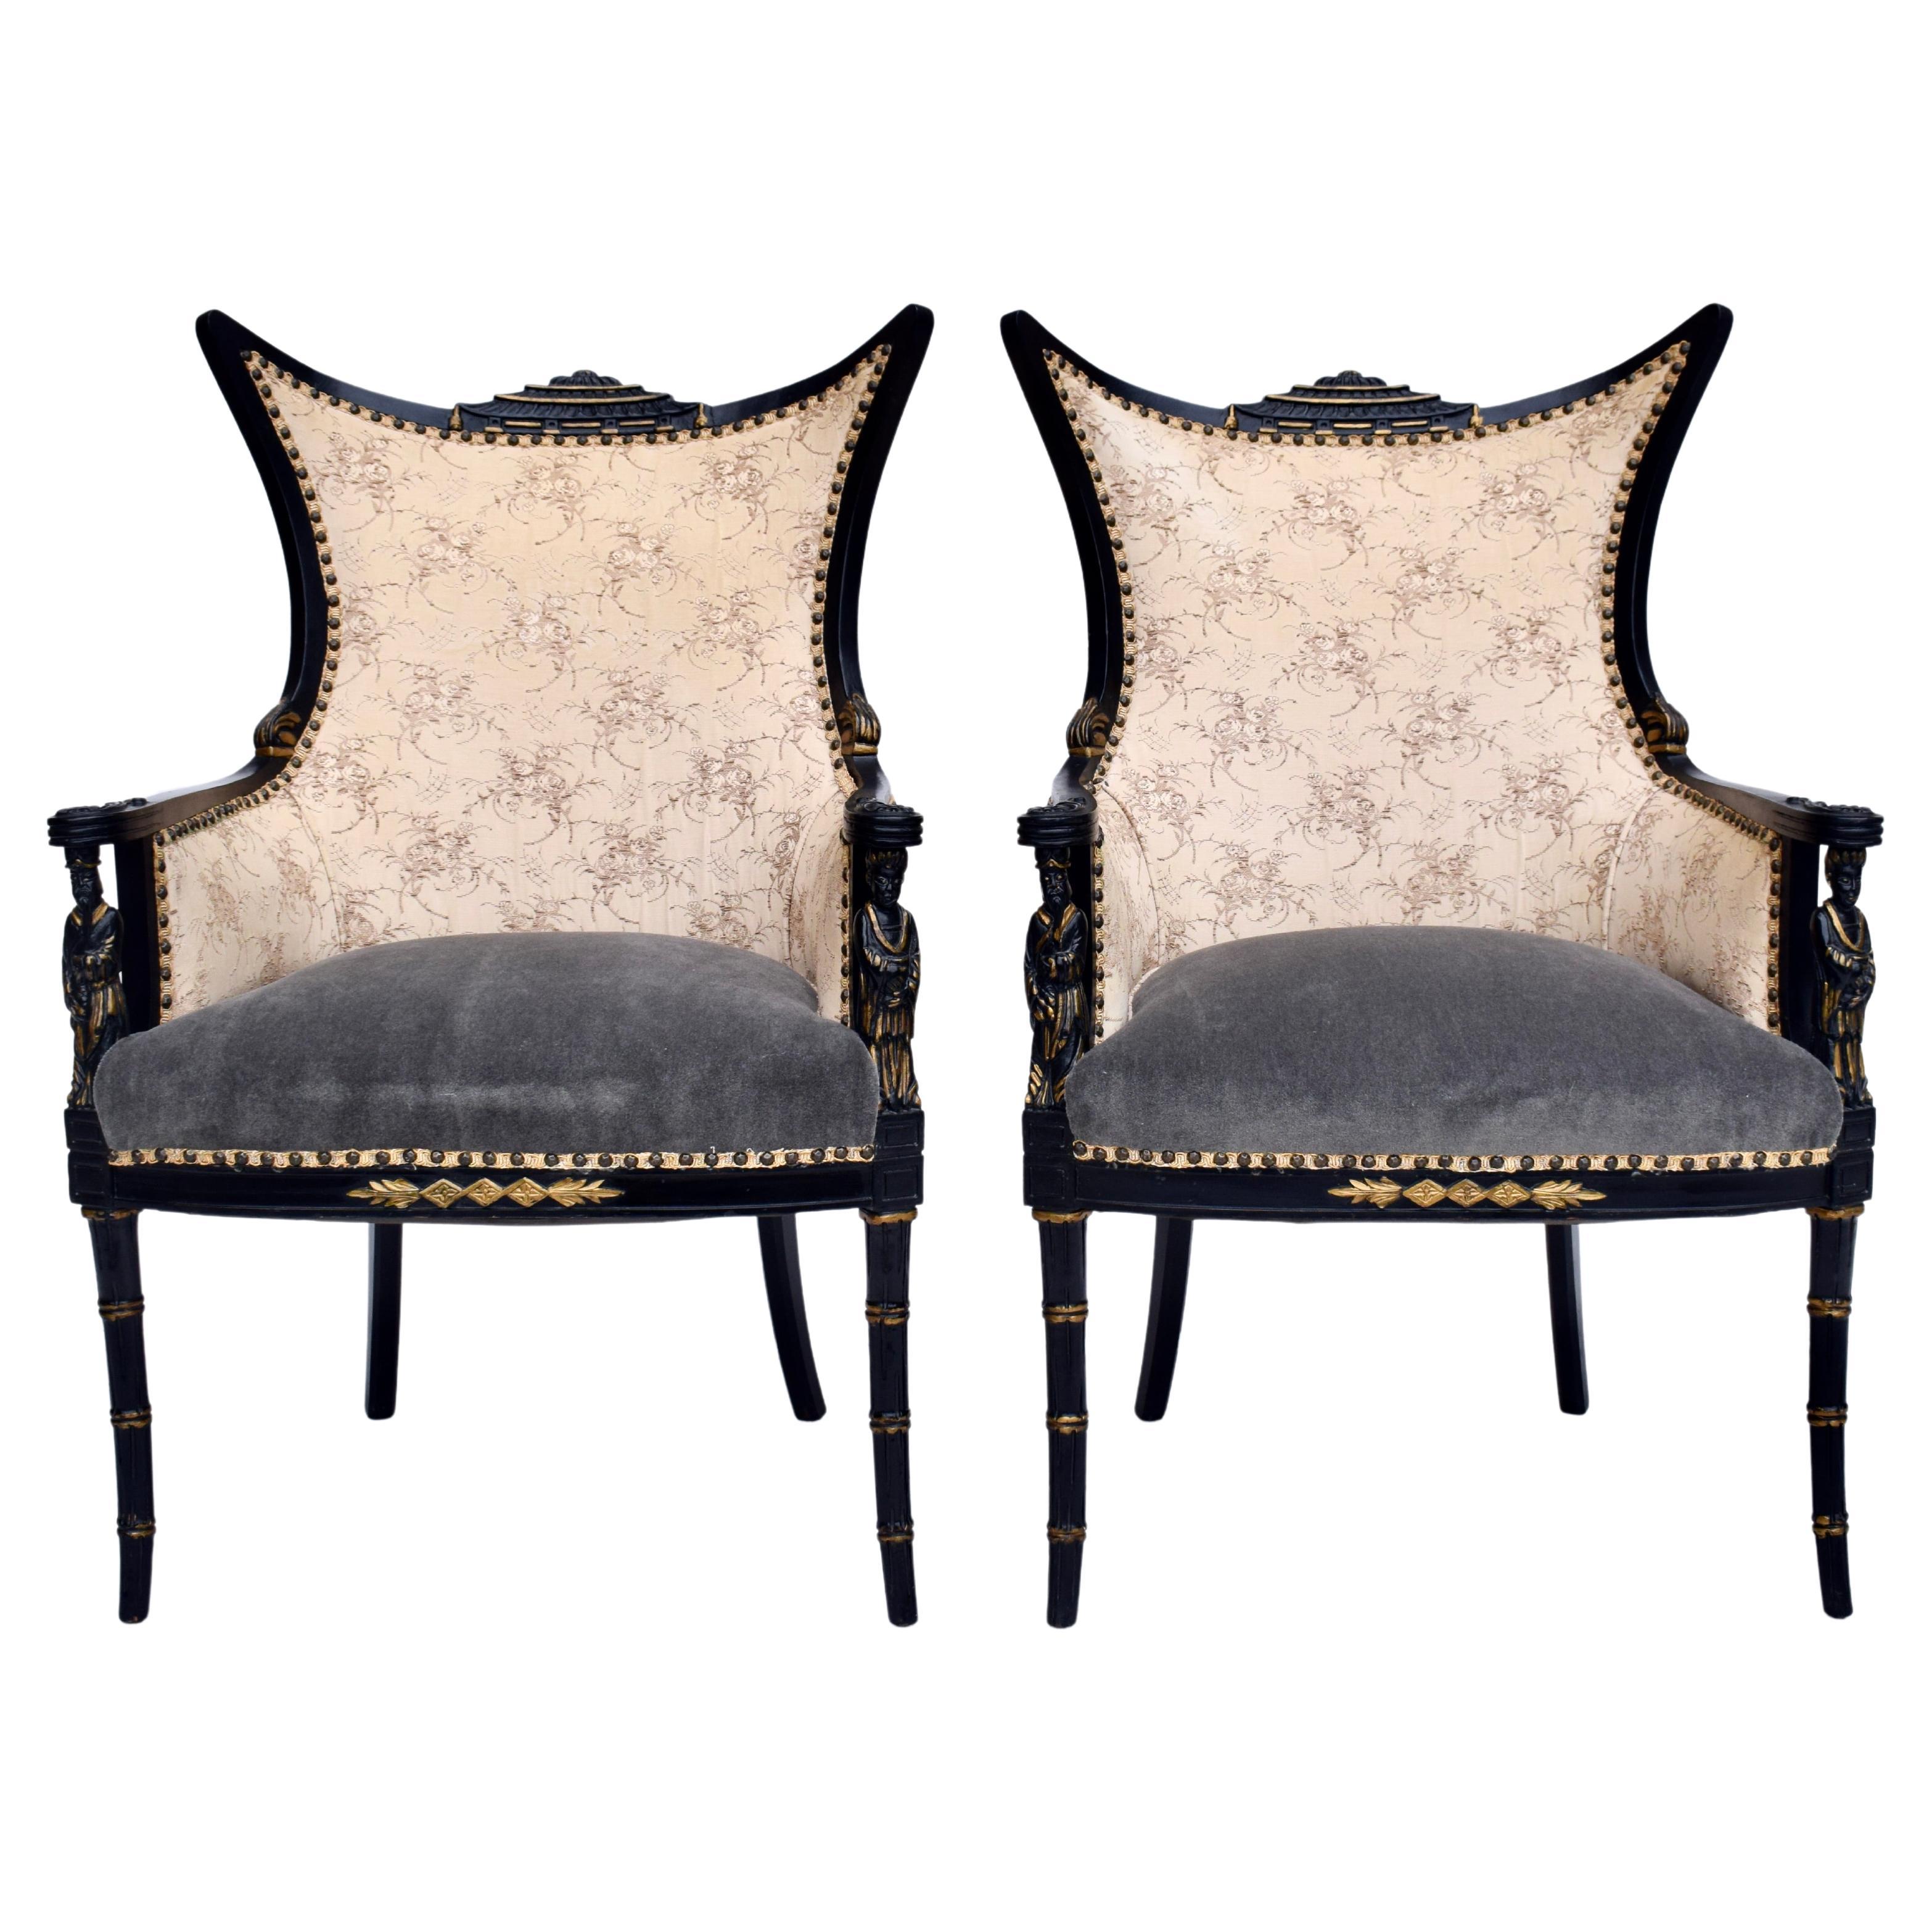 Fauteuils pagodes chinoiseries vintage